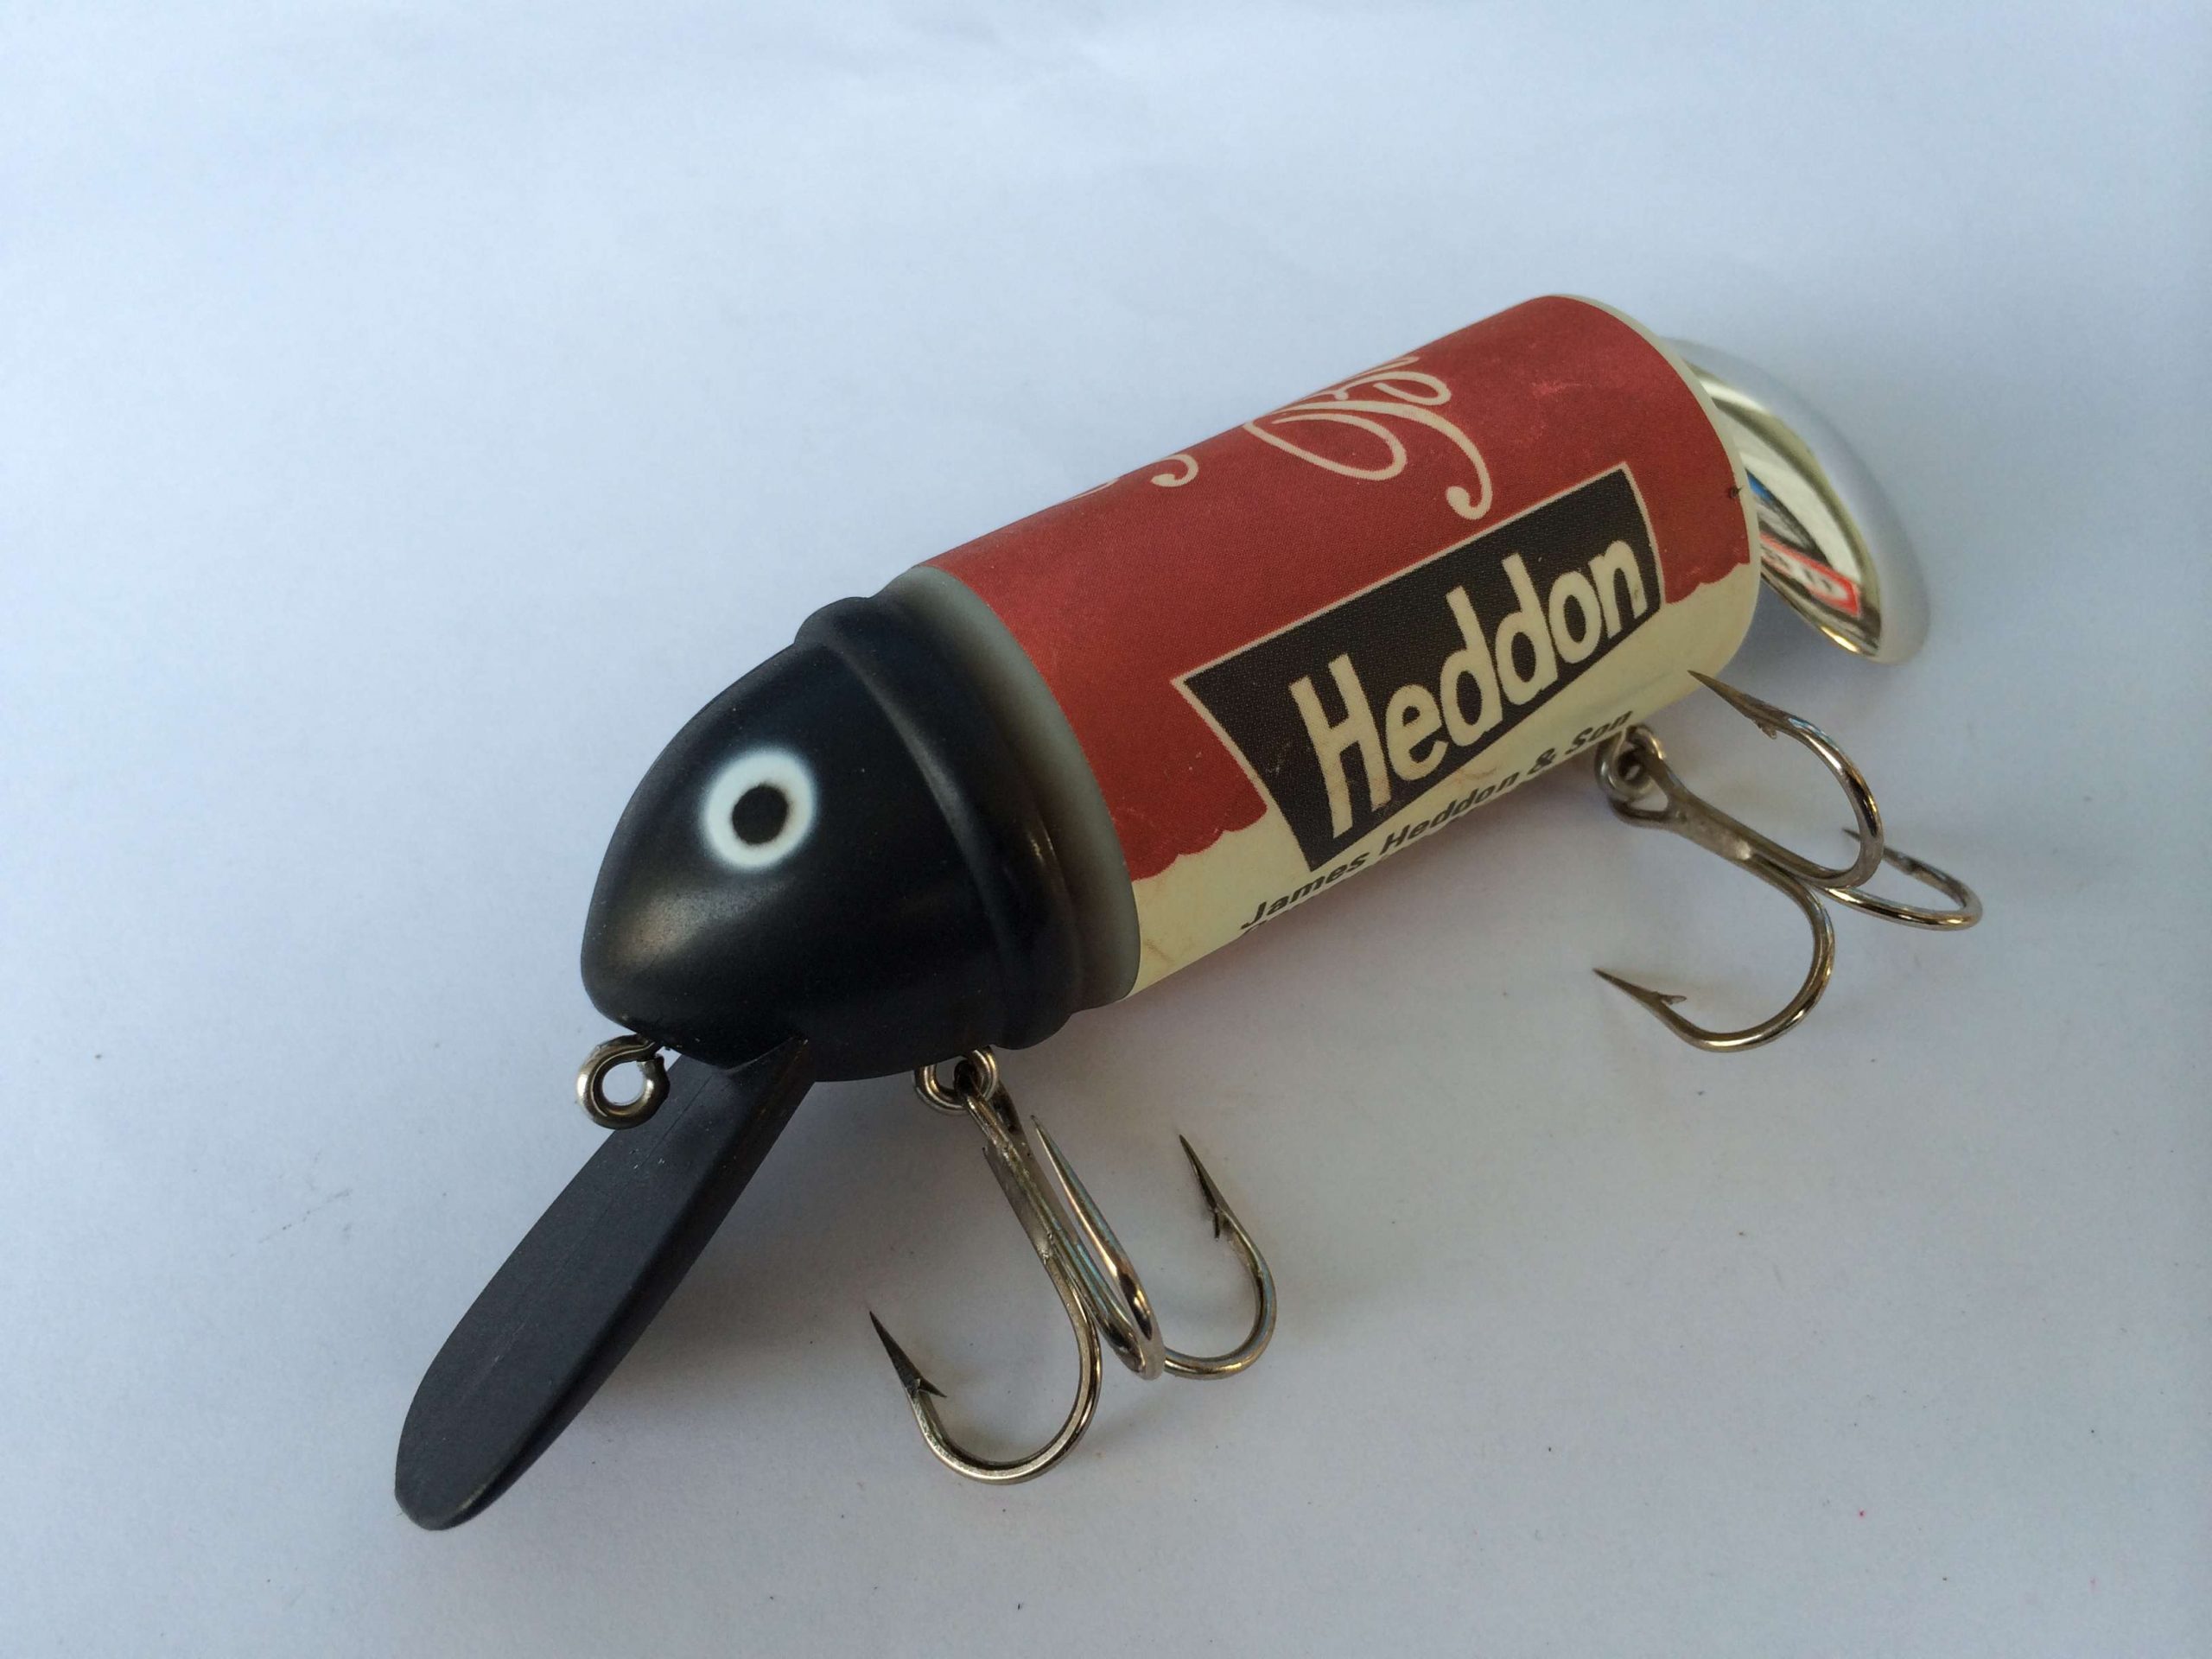 Here's some homage to Heddon.